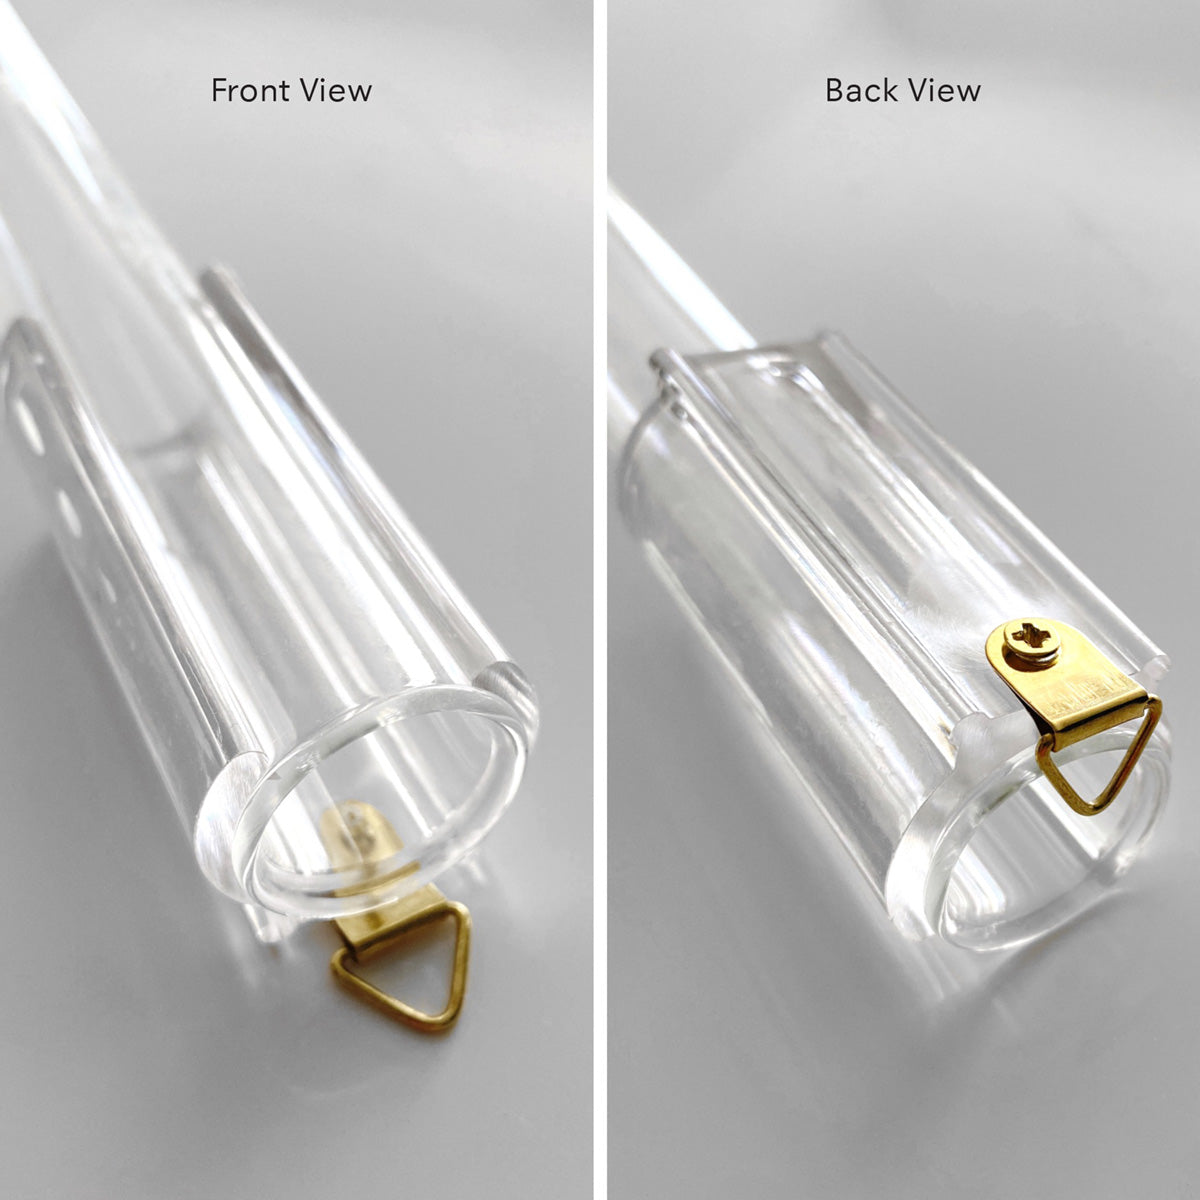 Clear Test Tube Plant Holder showing front and backside detailed views